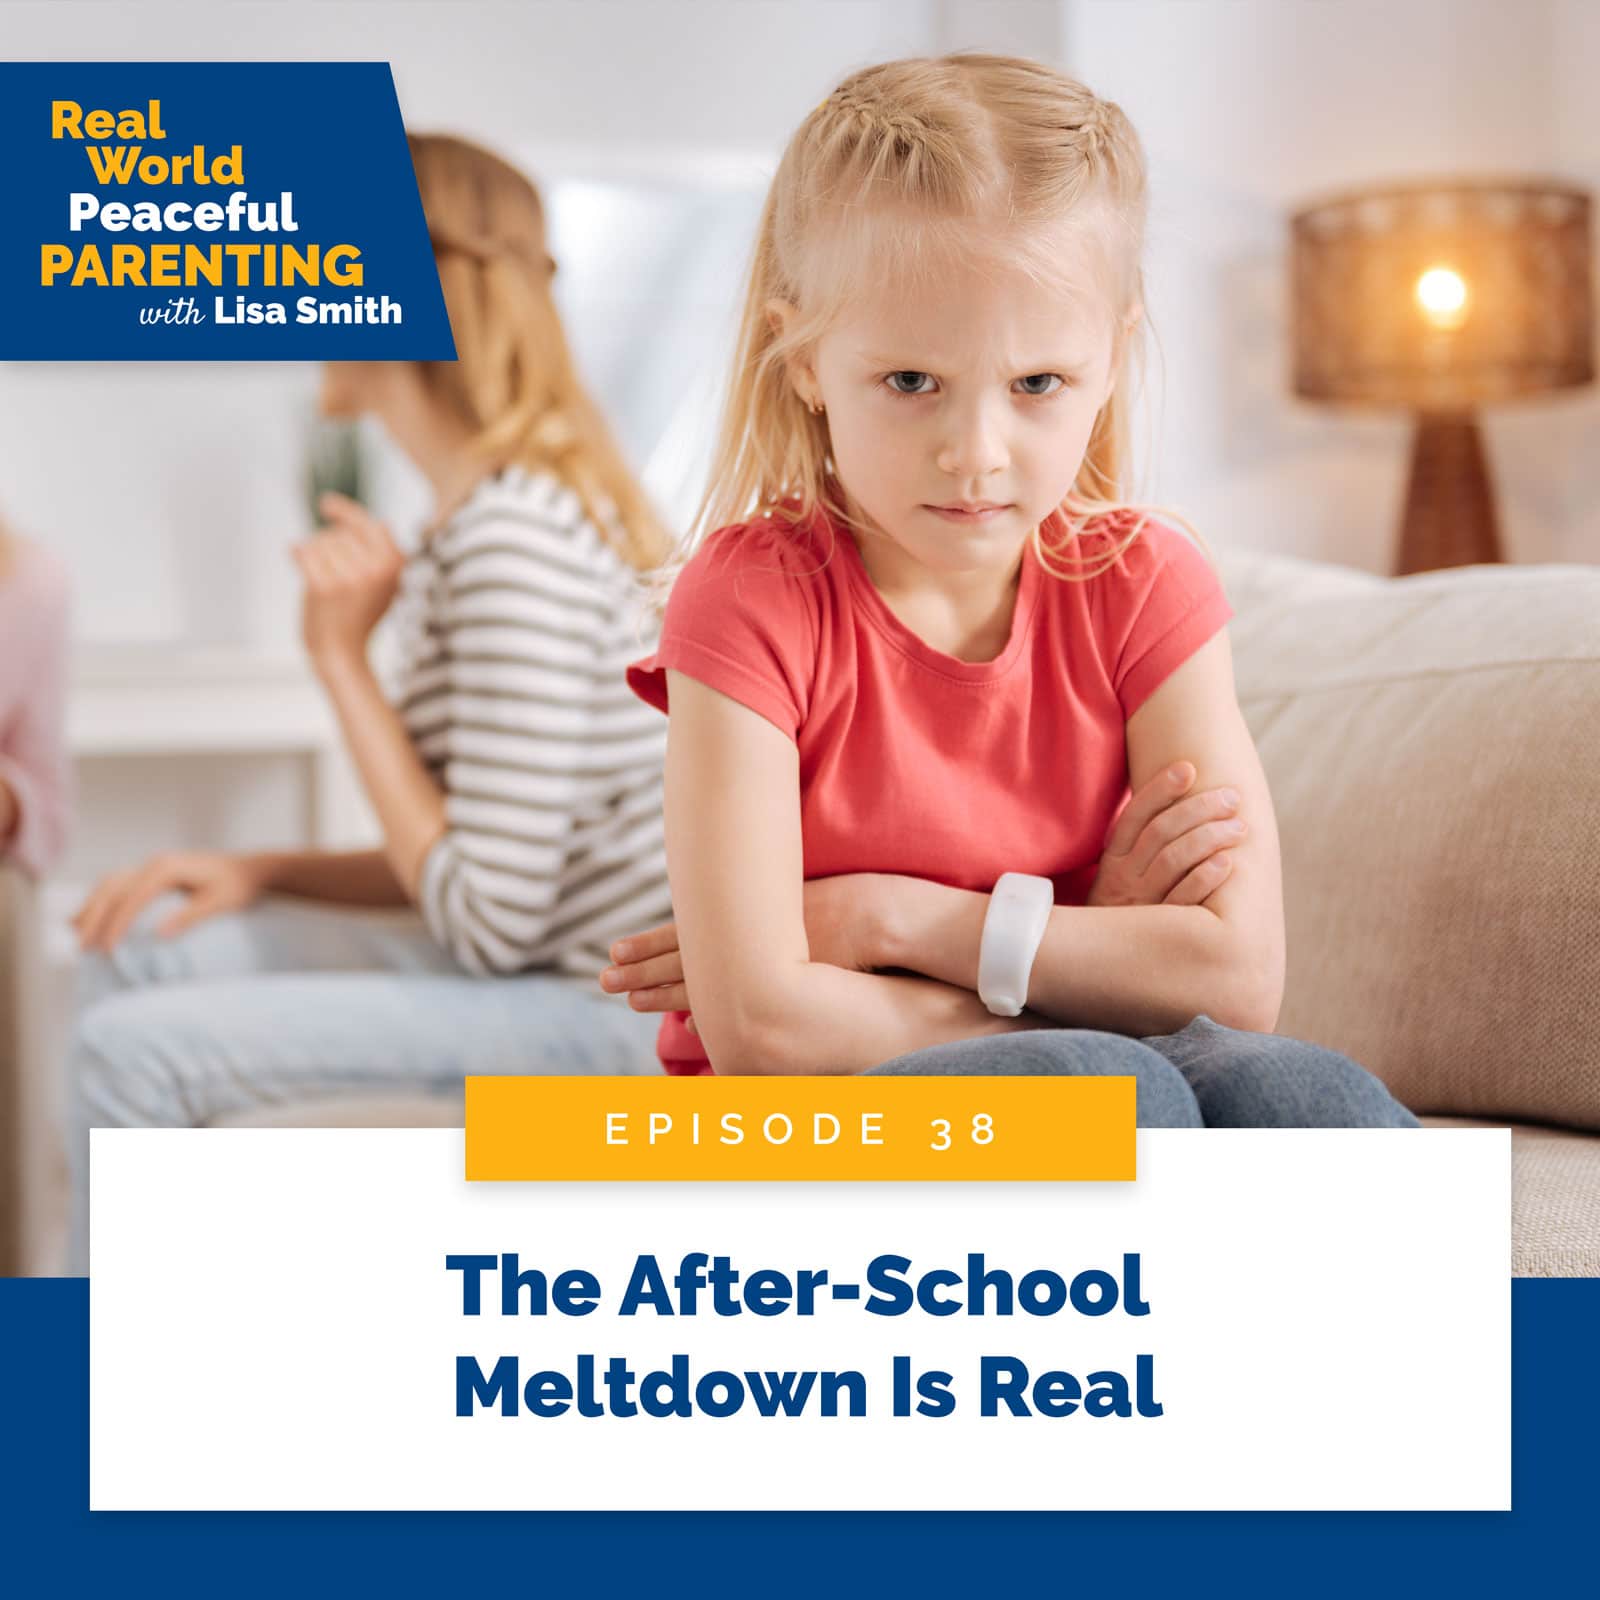 Real World Peaceful Parenting with Lisa Smith | The After-School Meltdown Is Real